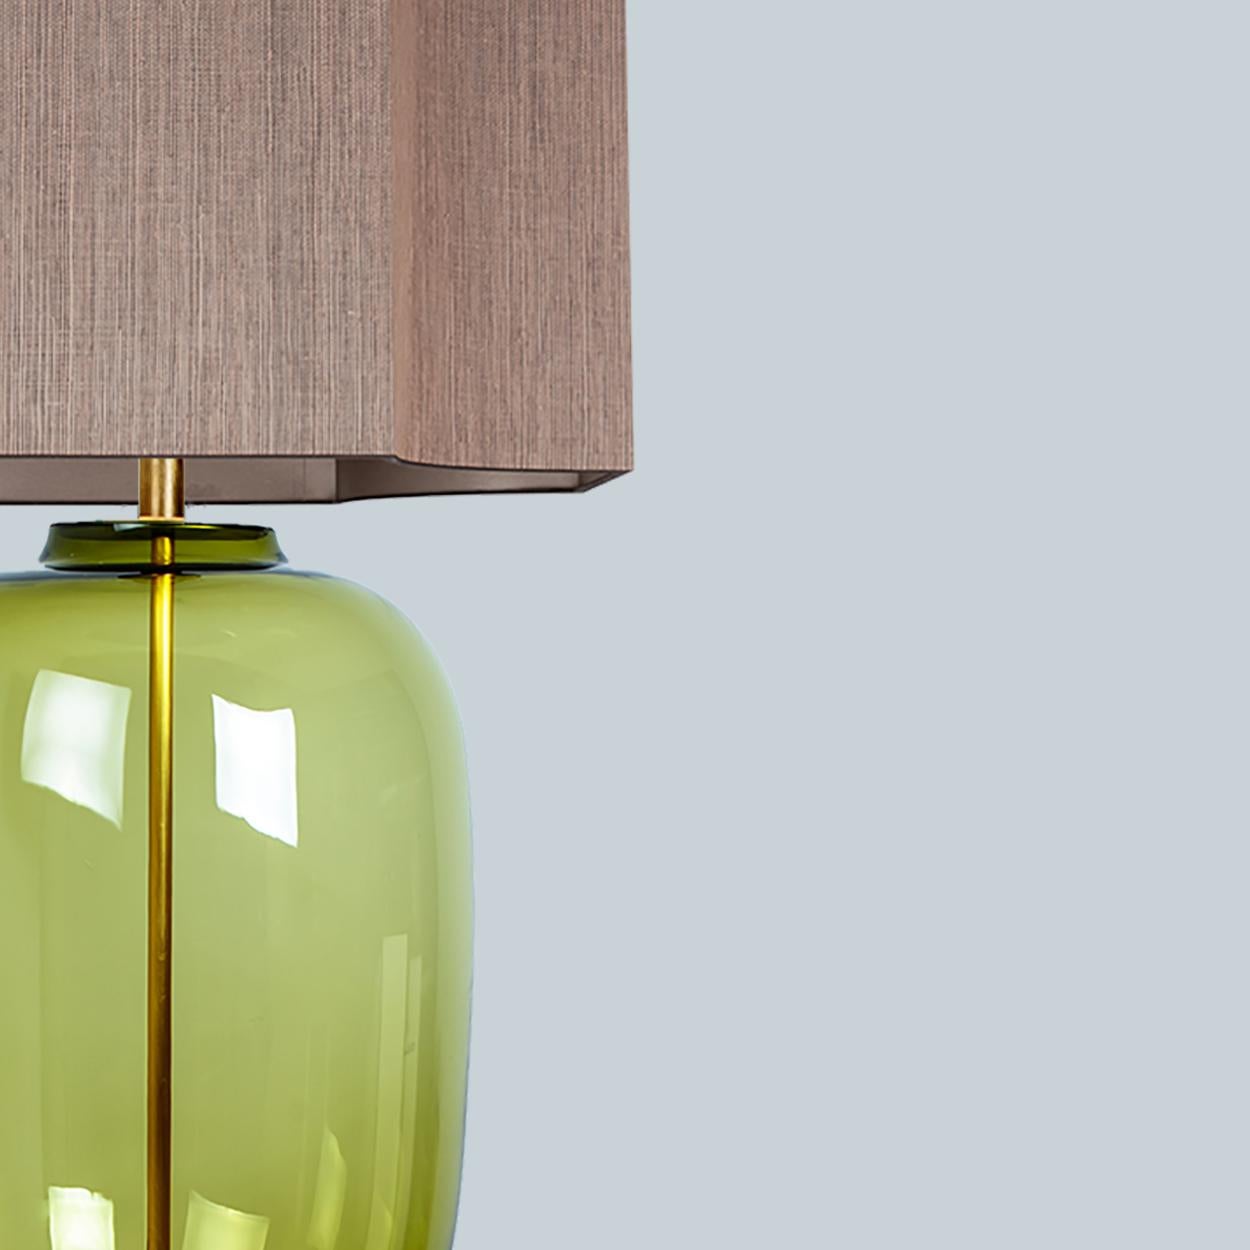 A unique Minimalist timeless design. Each extra large glass table lamp features a green exceptional transparent shaped base with a solid walnut wooden foot with old brass accents and a brass rod running through the center. Enhancing the light and